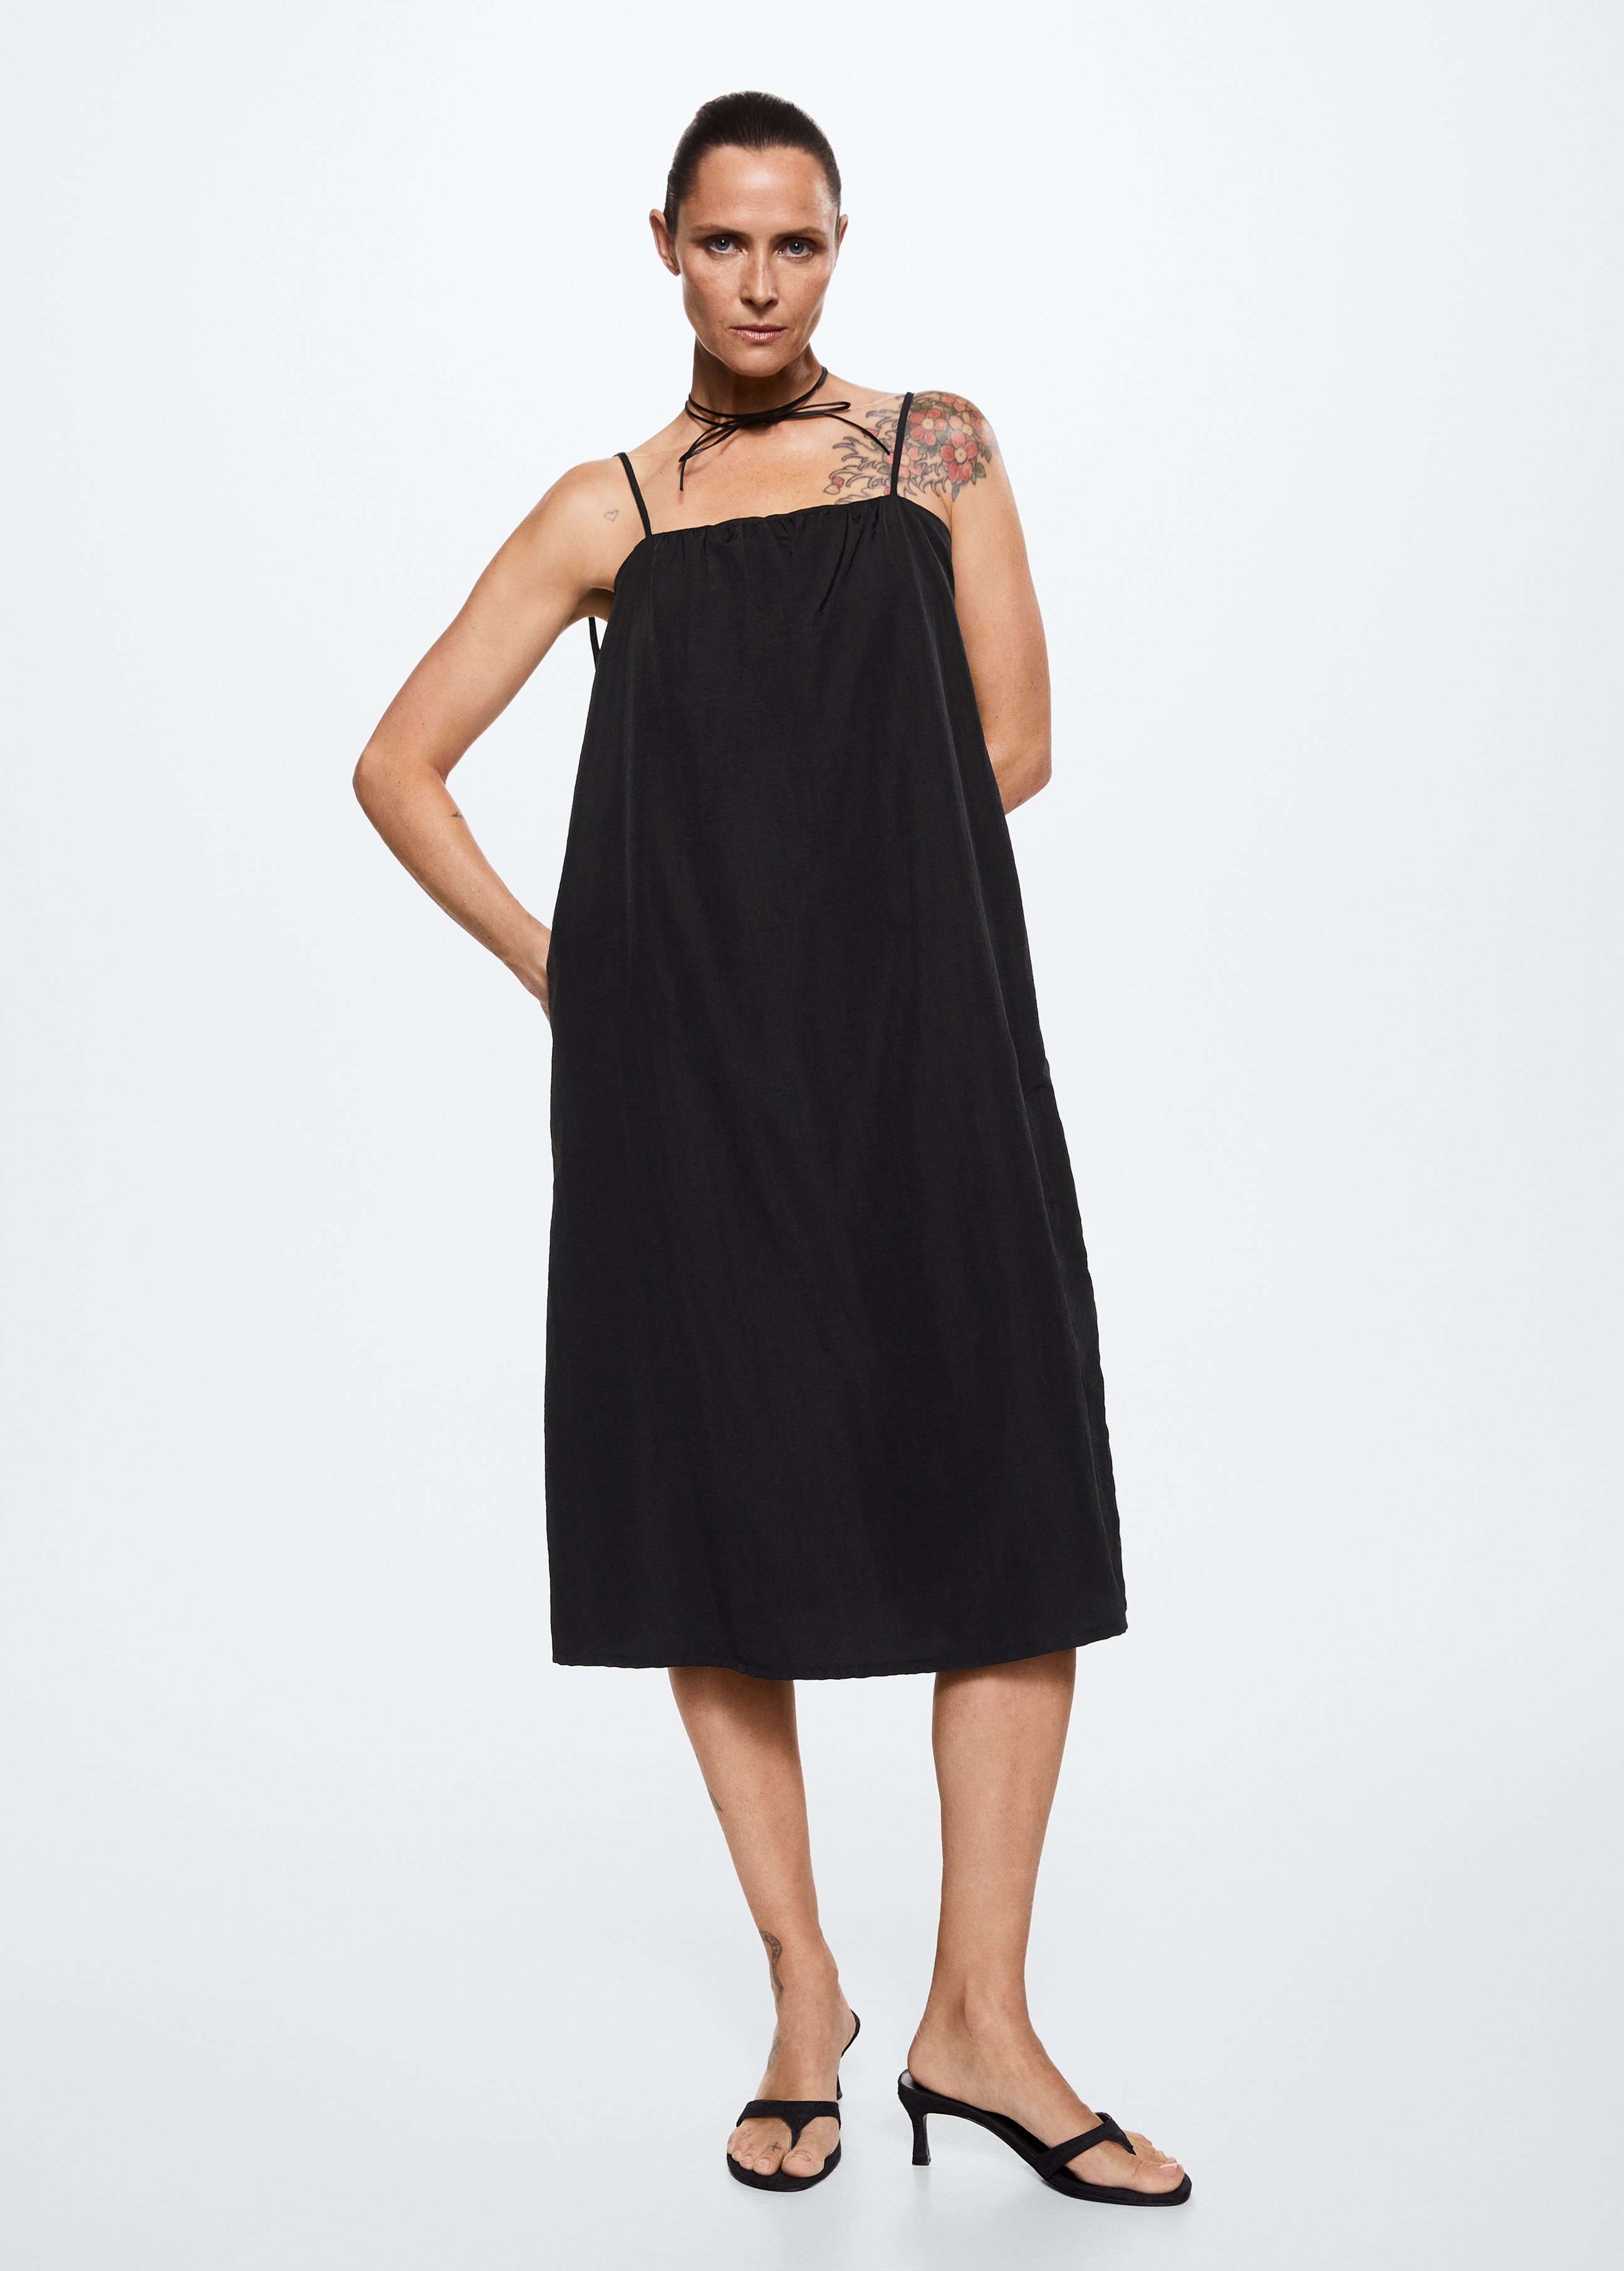 Cut-out ruched dress - General plane